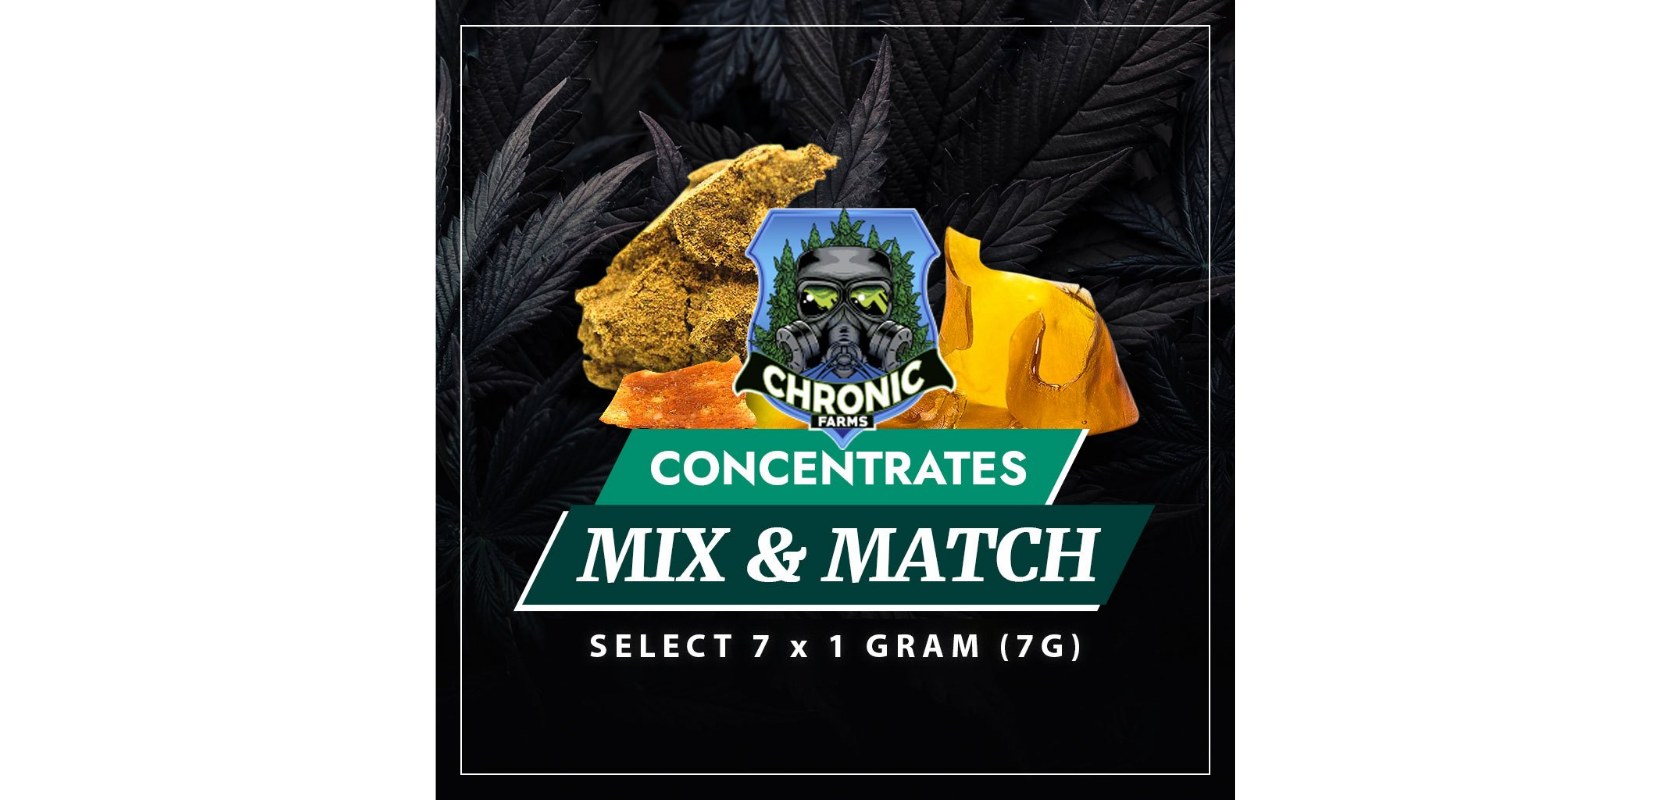 If you like shatter, you’re going to love this bundle! Build your very own 7G Mix and Match concentrate bundle and pay only $94.99 to get it delivered to your door. 